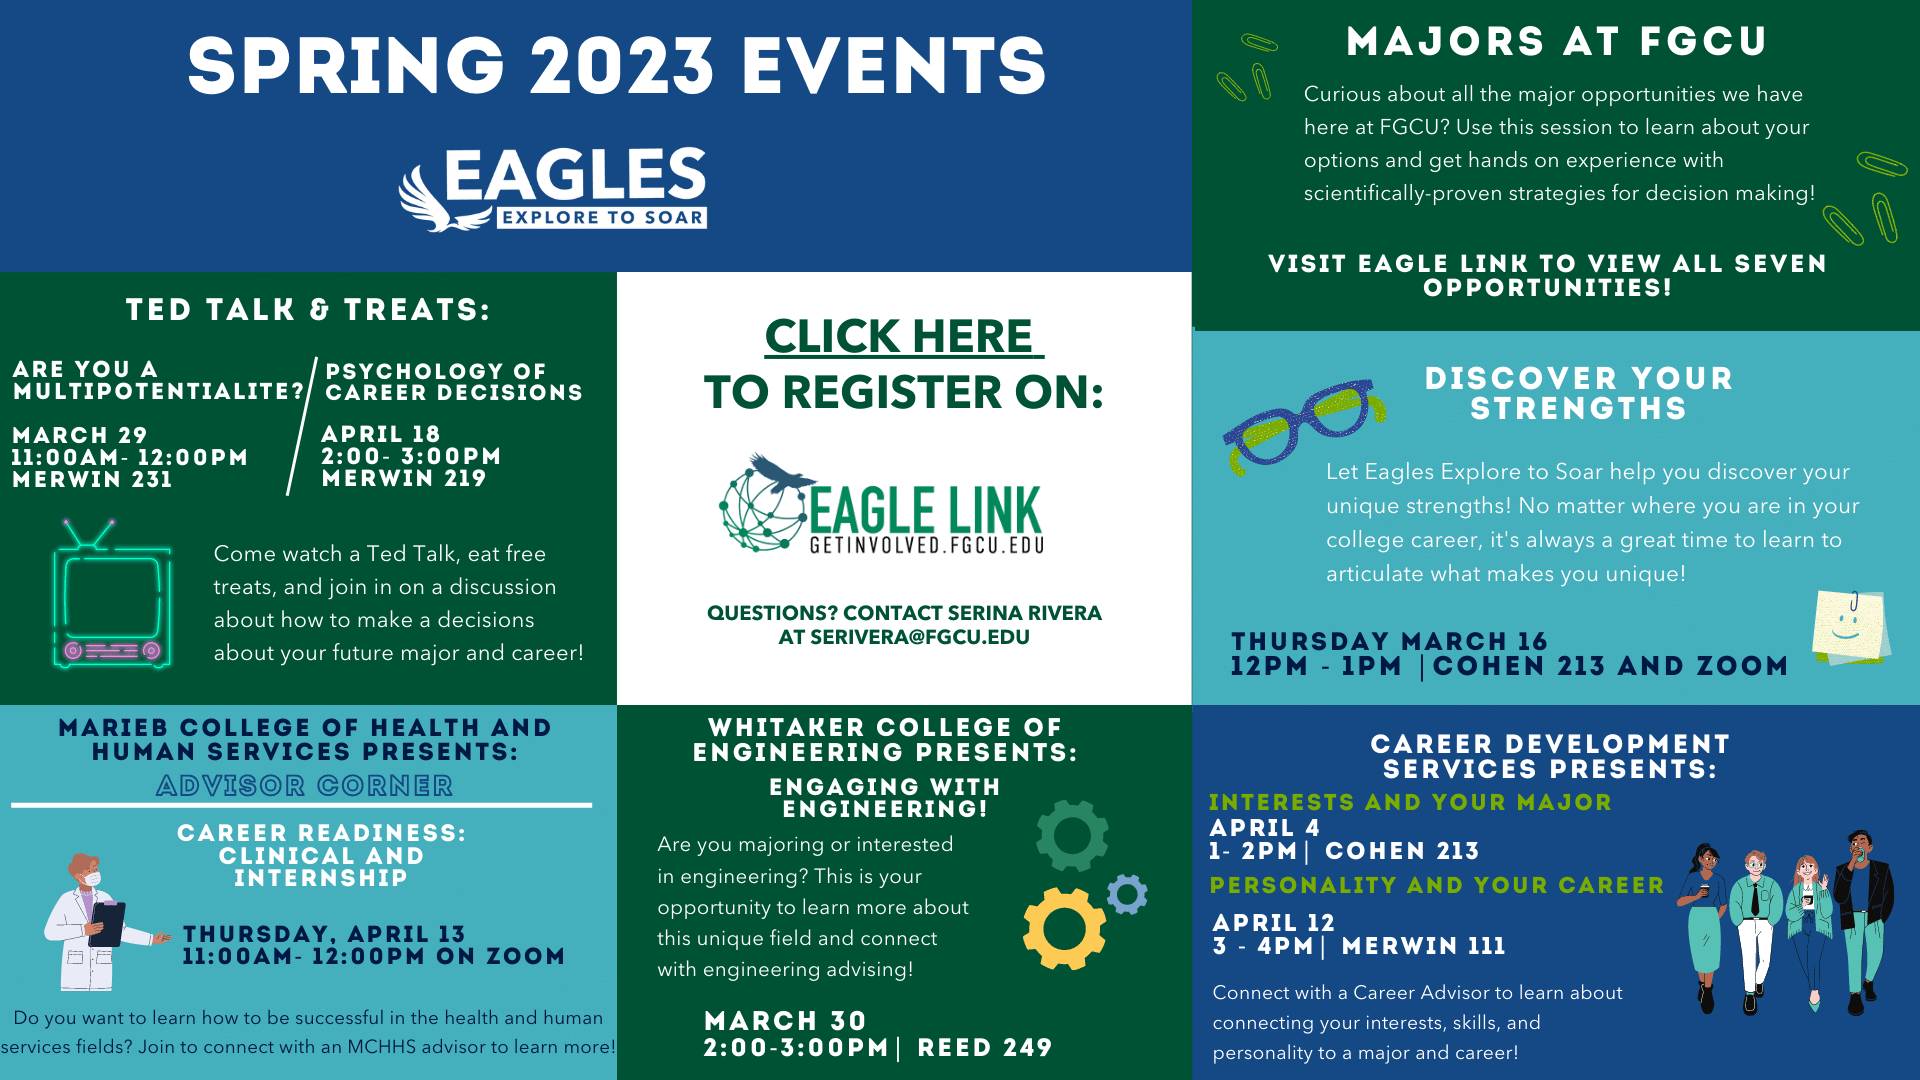 Eagles Explore to Soar Spring 2023 Events